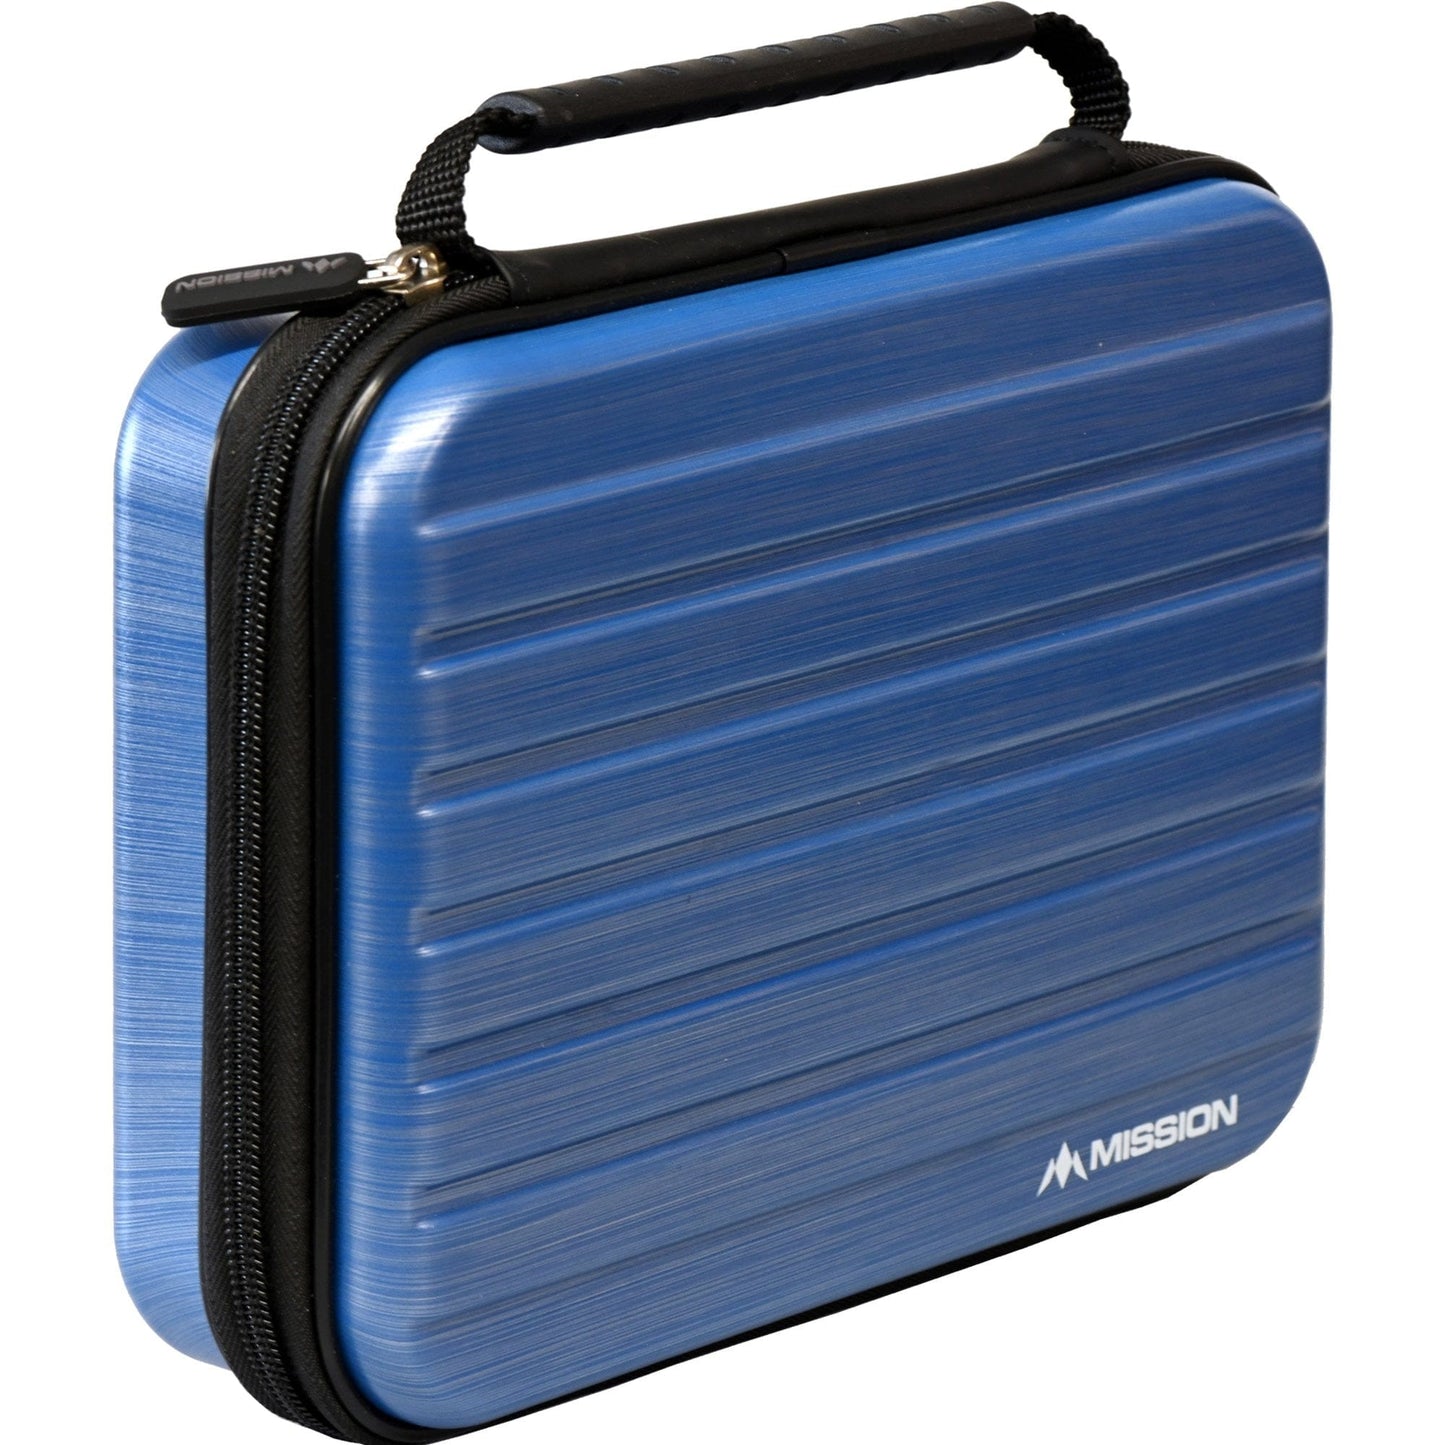 Mission ABS-4 Darts Case - Strong Protection - Metallic Aqua Blue